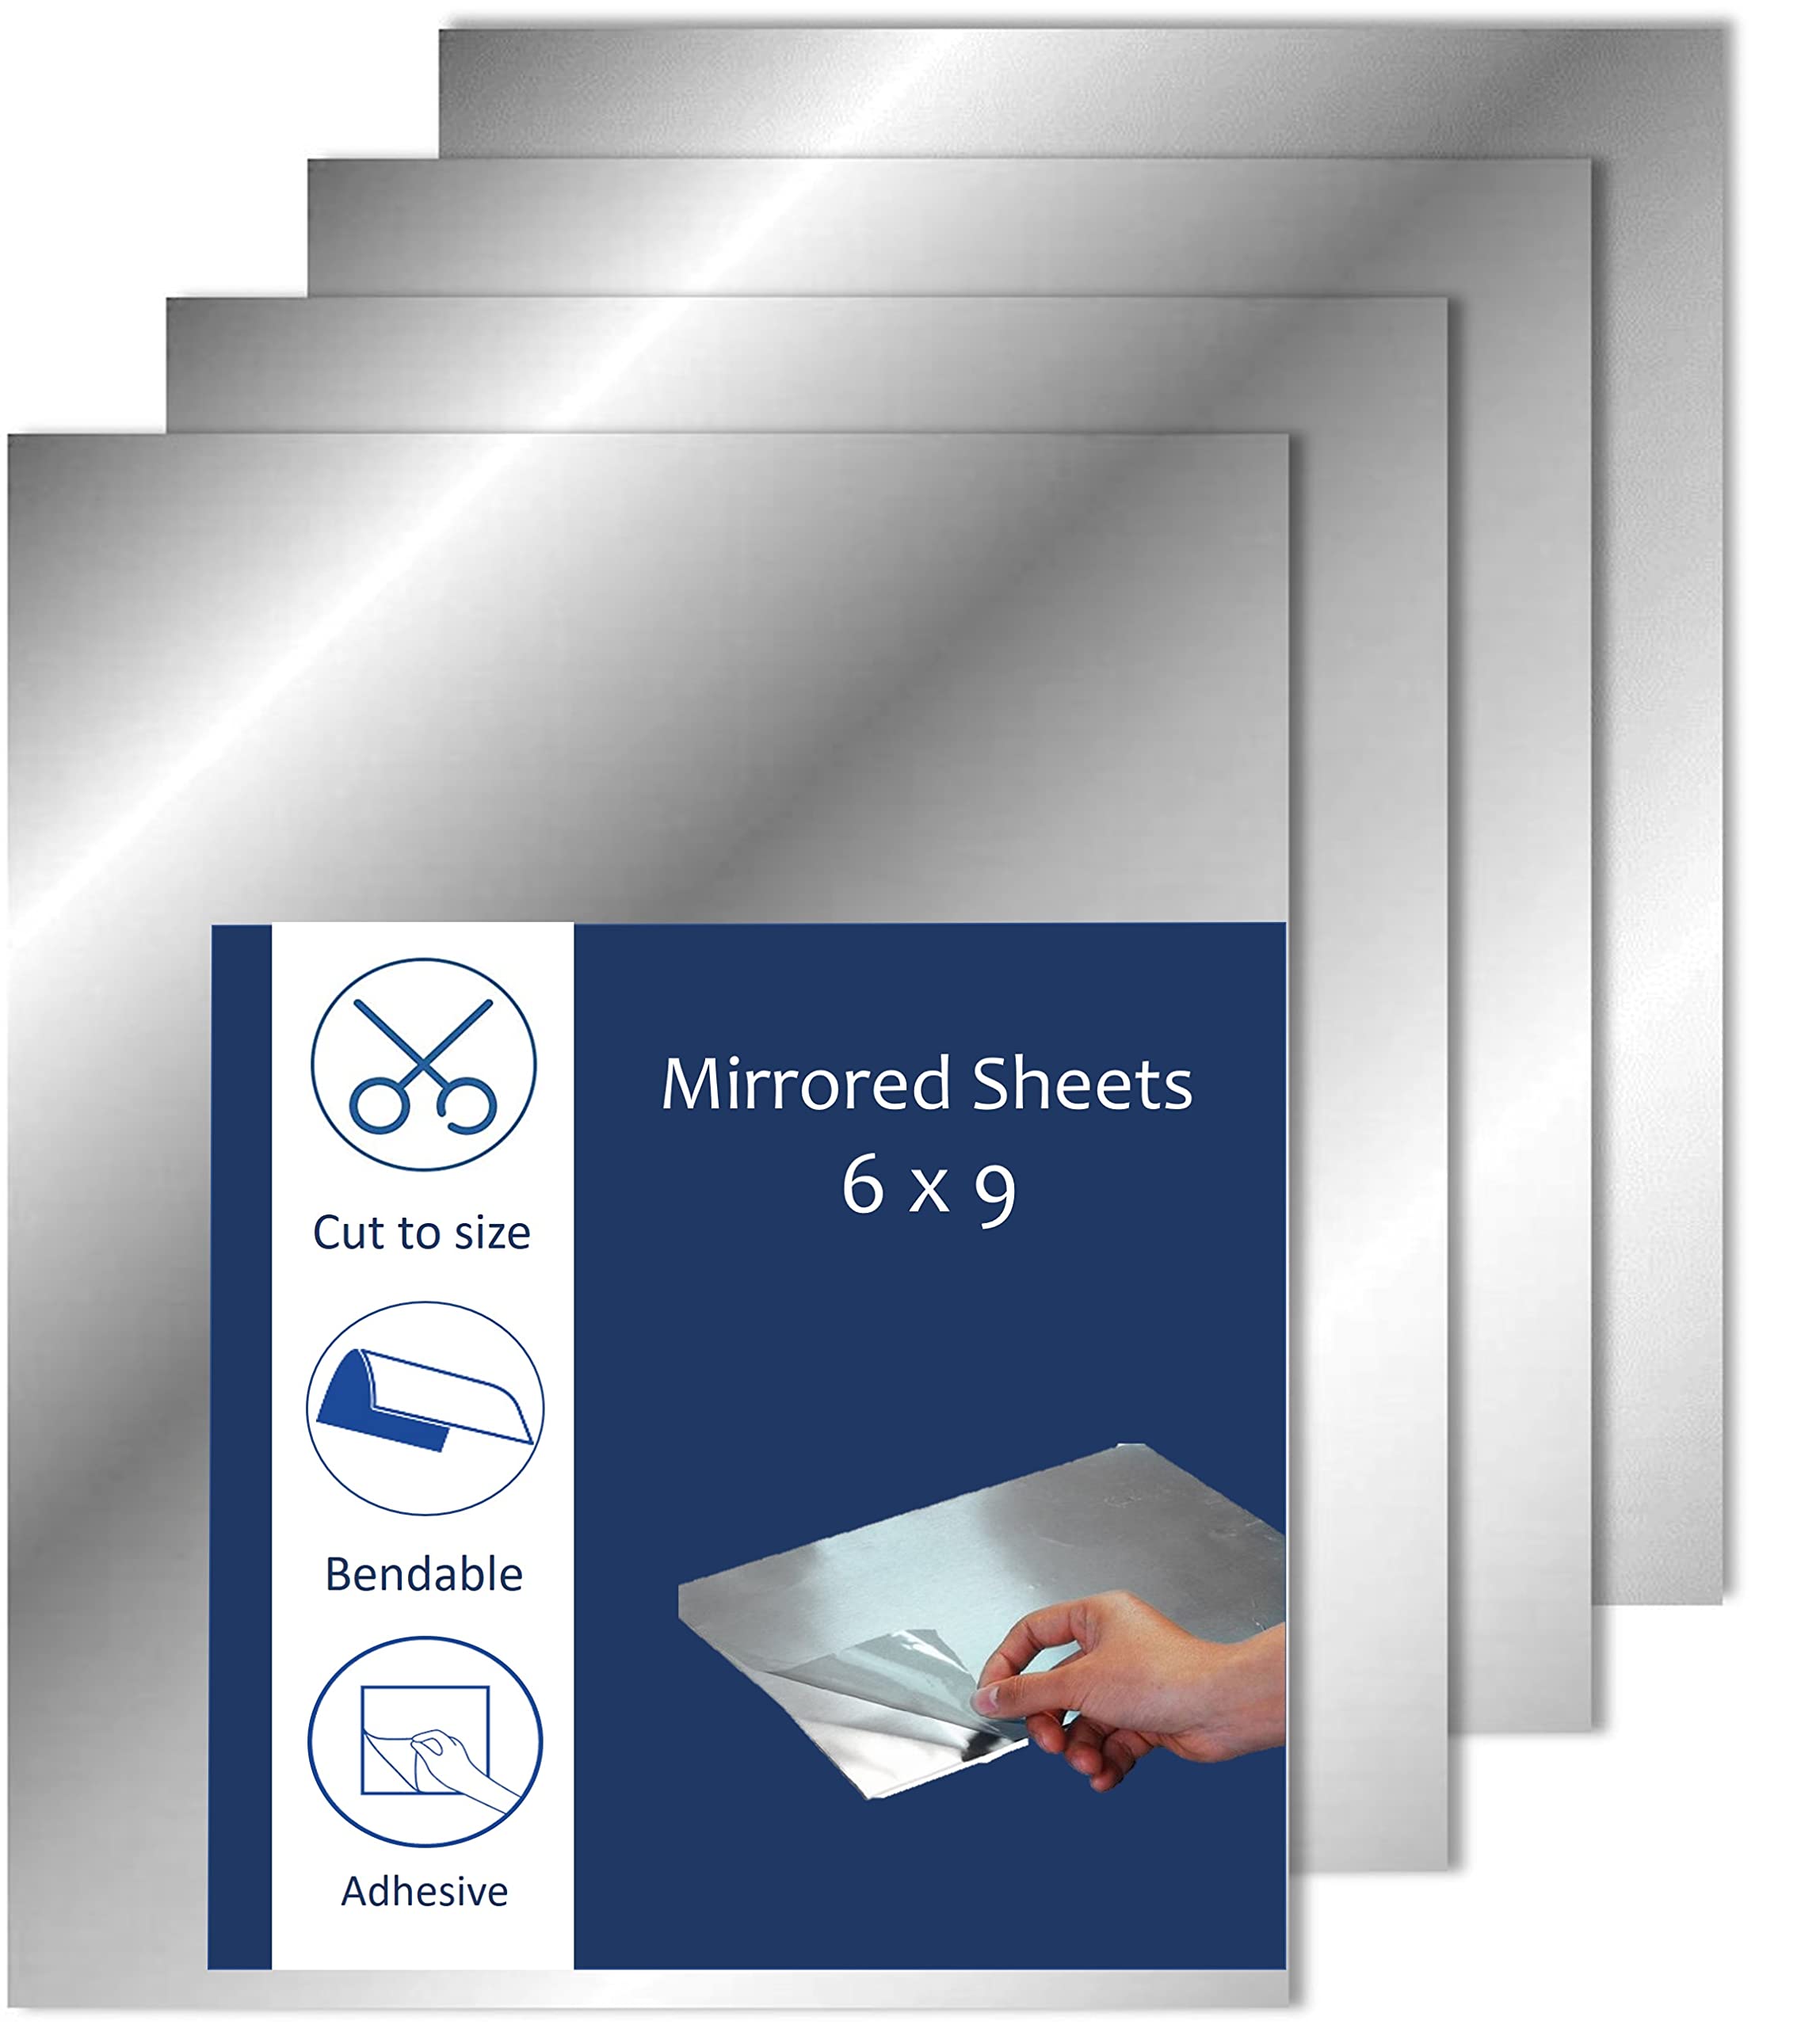 Quality Adhesive Mirror Sheet 6 x 9 Inches Flexible Mirrors Sheets, Non-Glass Self Adhesive Stick on Mirror Tiles, Cut Mirror Stickers to Size, Peel and Stick, Great for Crafts and Mirror Wall,  - Like New